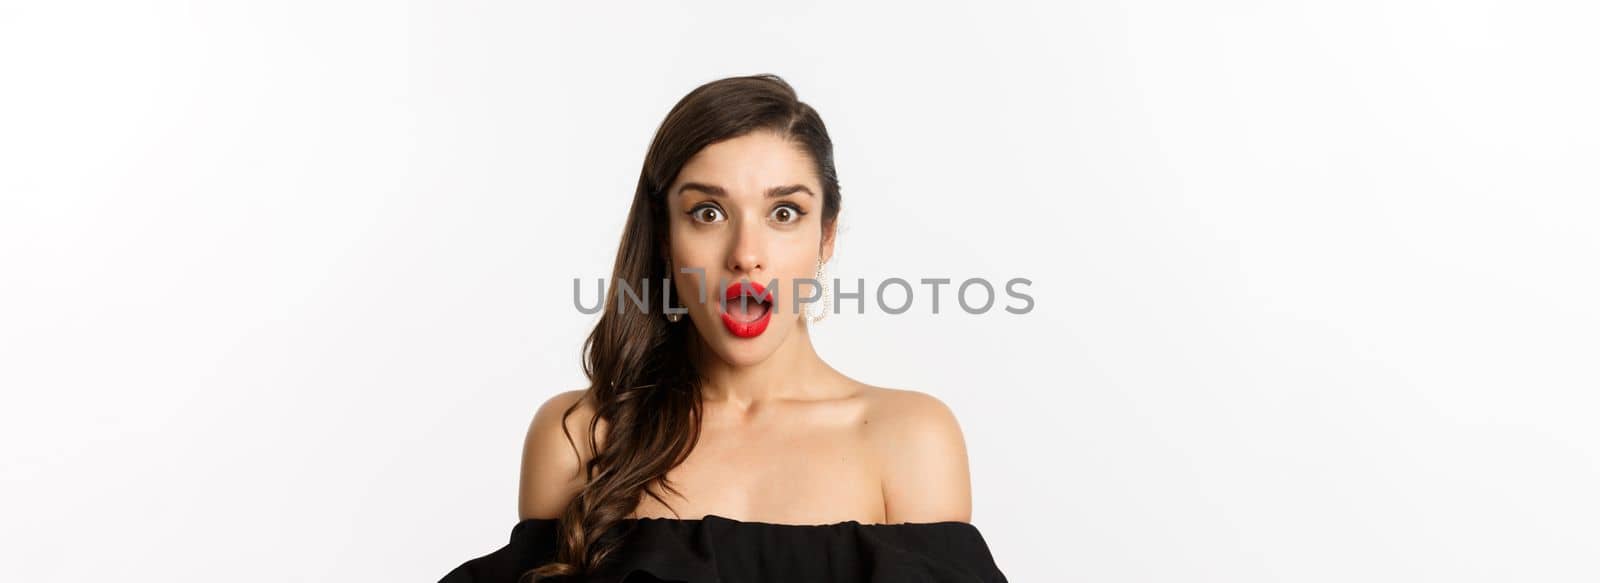 Fashion and beauty concept. Close-up of attractive brunette woman in black dress open mouth surprised, looking in awe at camera, white background.